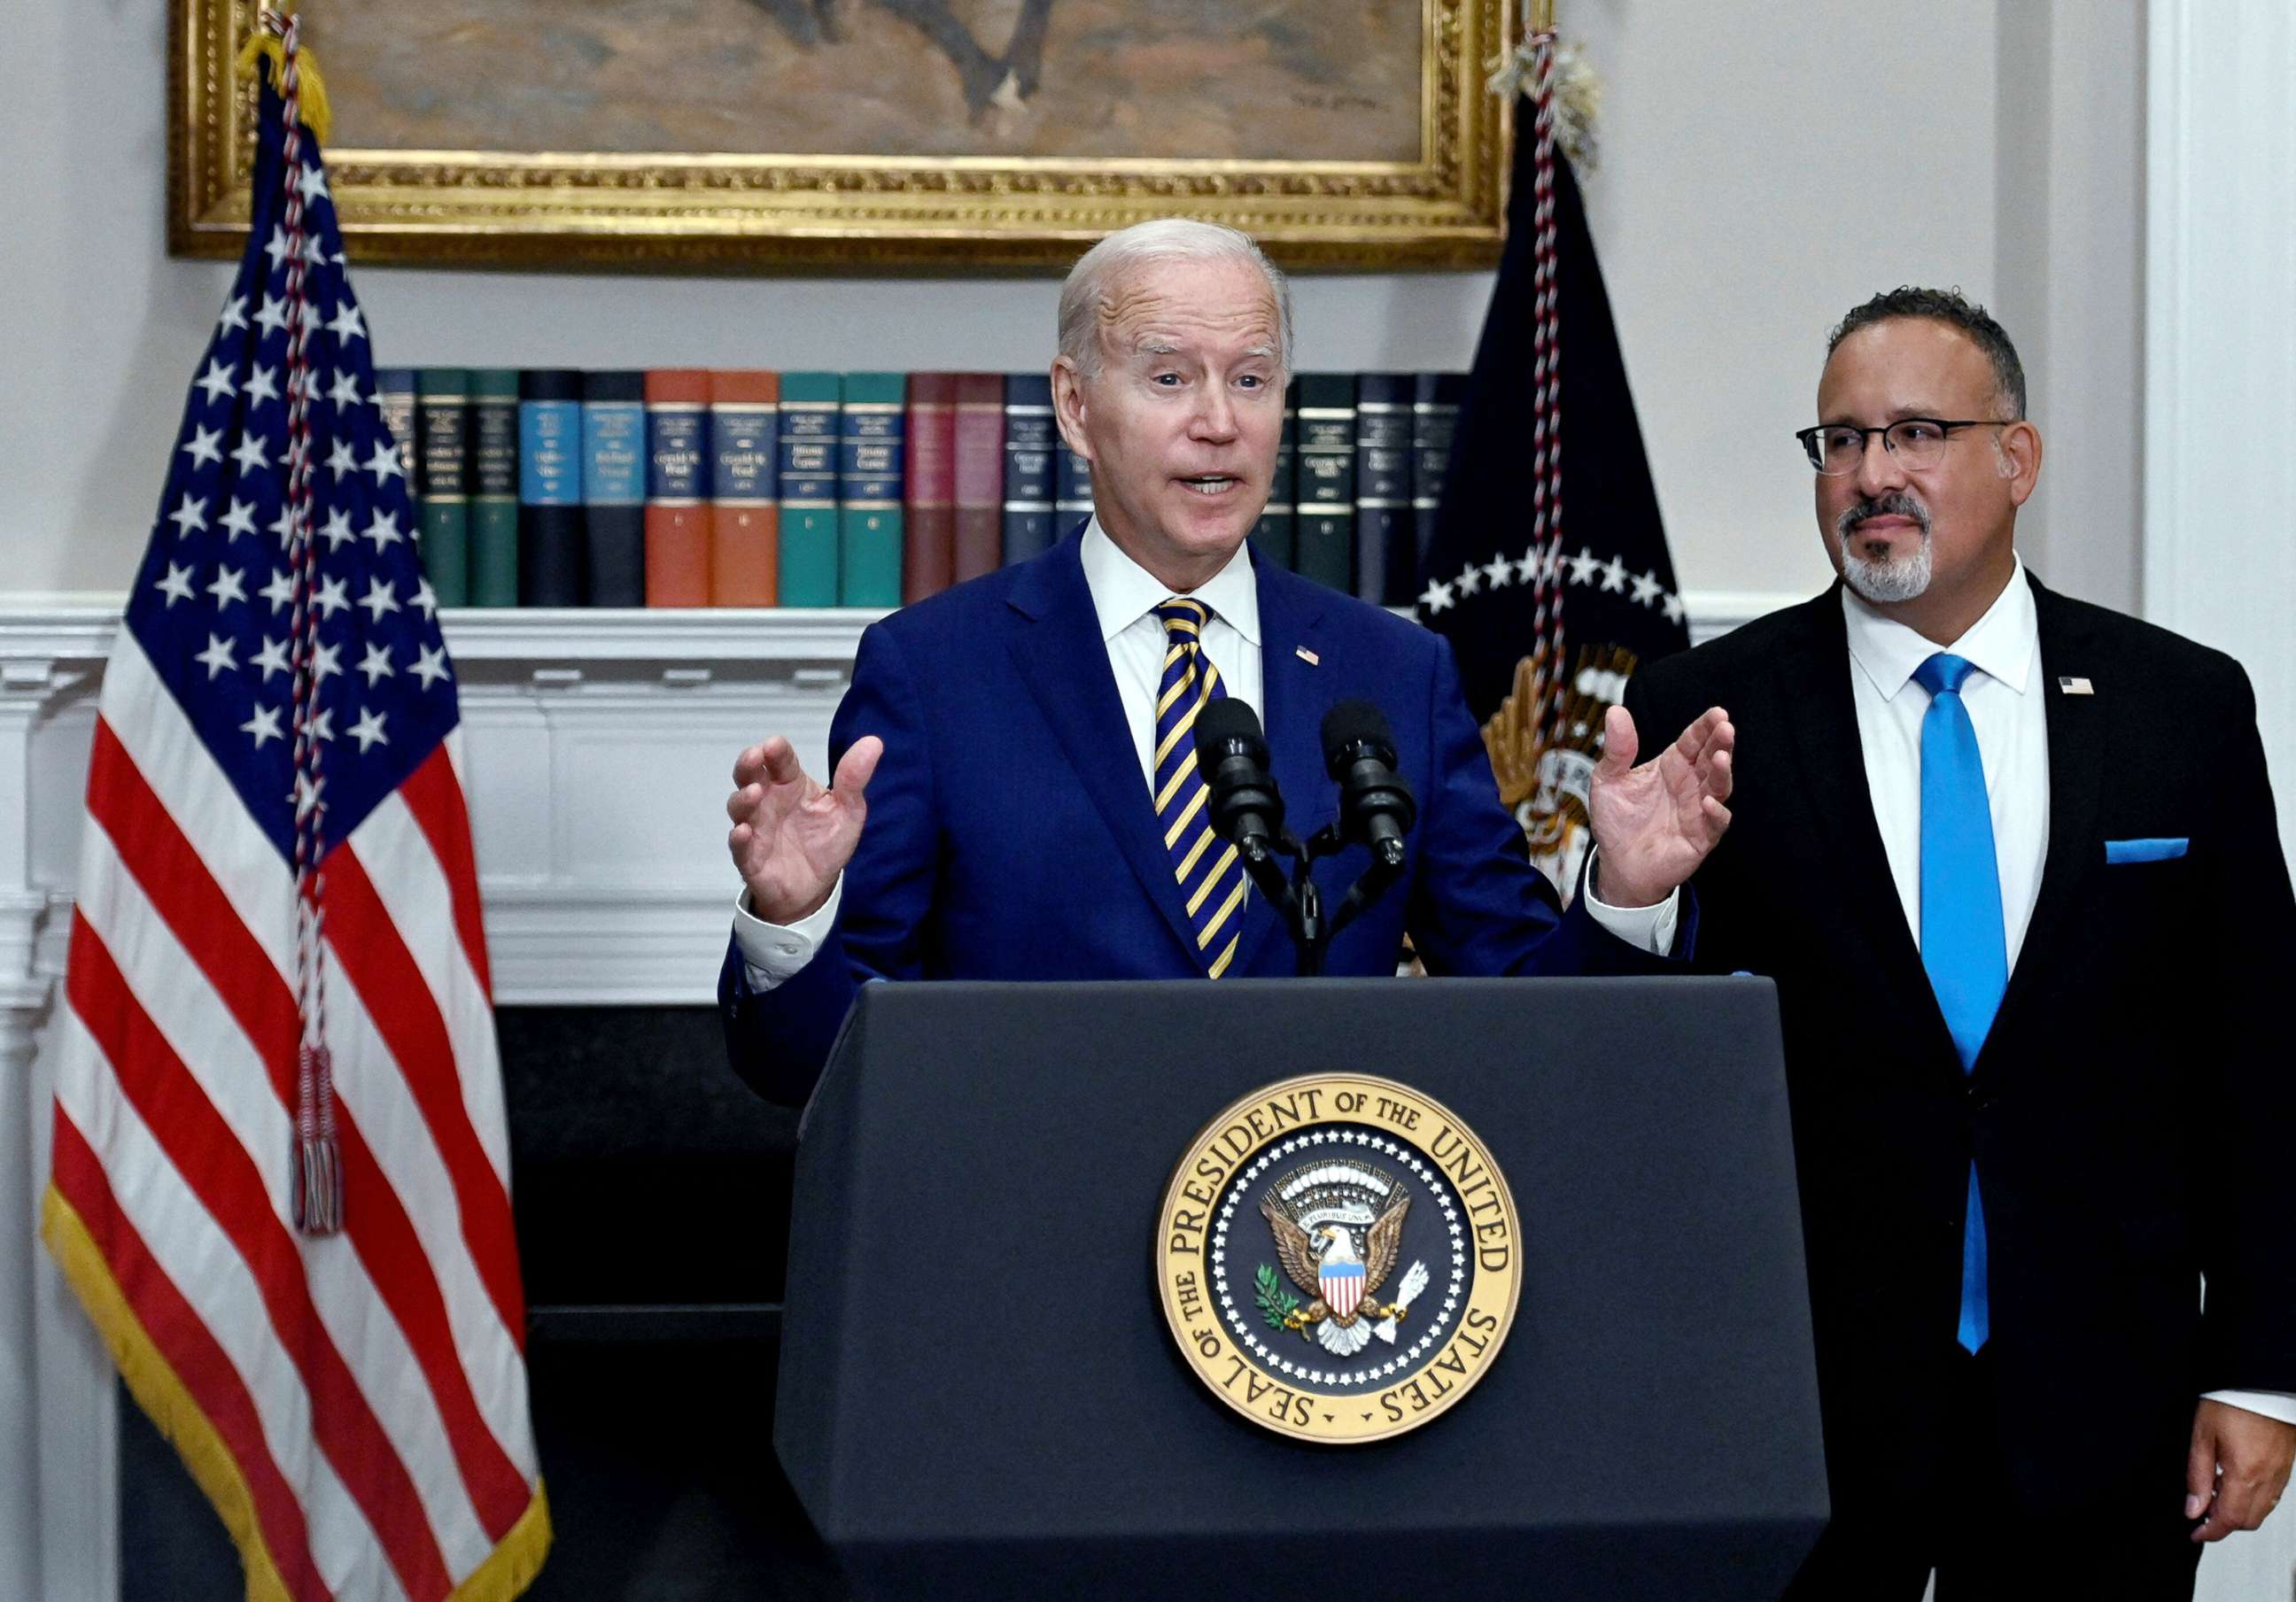 PHOTO: President Joe Biden announces student loan relief with Education Secretary Miguel Cardona, in the Roosevelt Room of the White House, in Washington, D.C., Aug. 24, 2022.